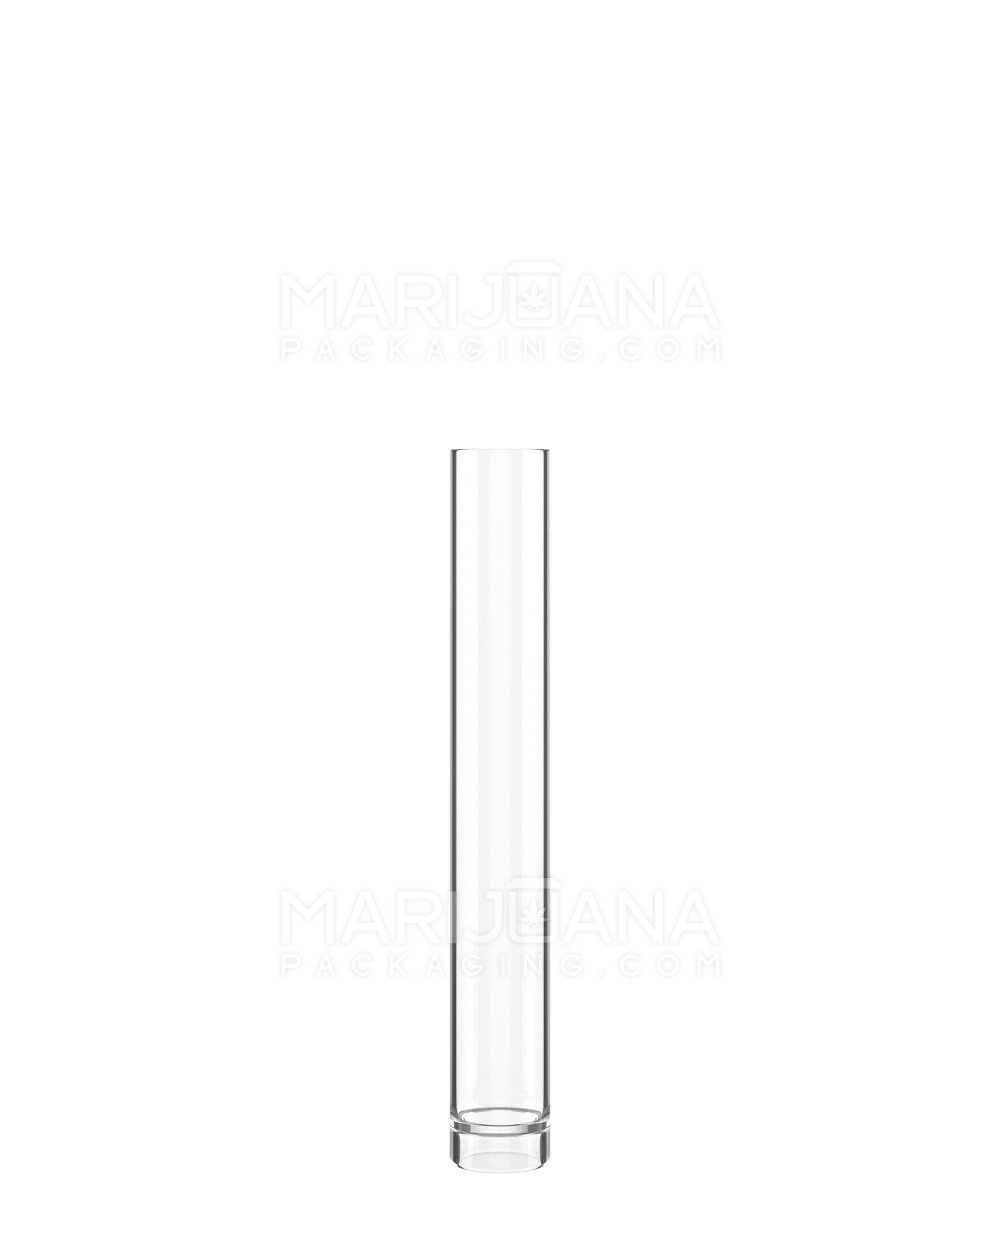 Buttonless Vape Cartridge Tube w/ White Cap | 86mm - Clear Plastic - 500 Count - 2